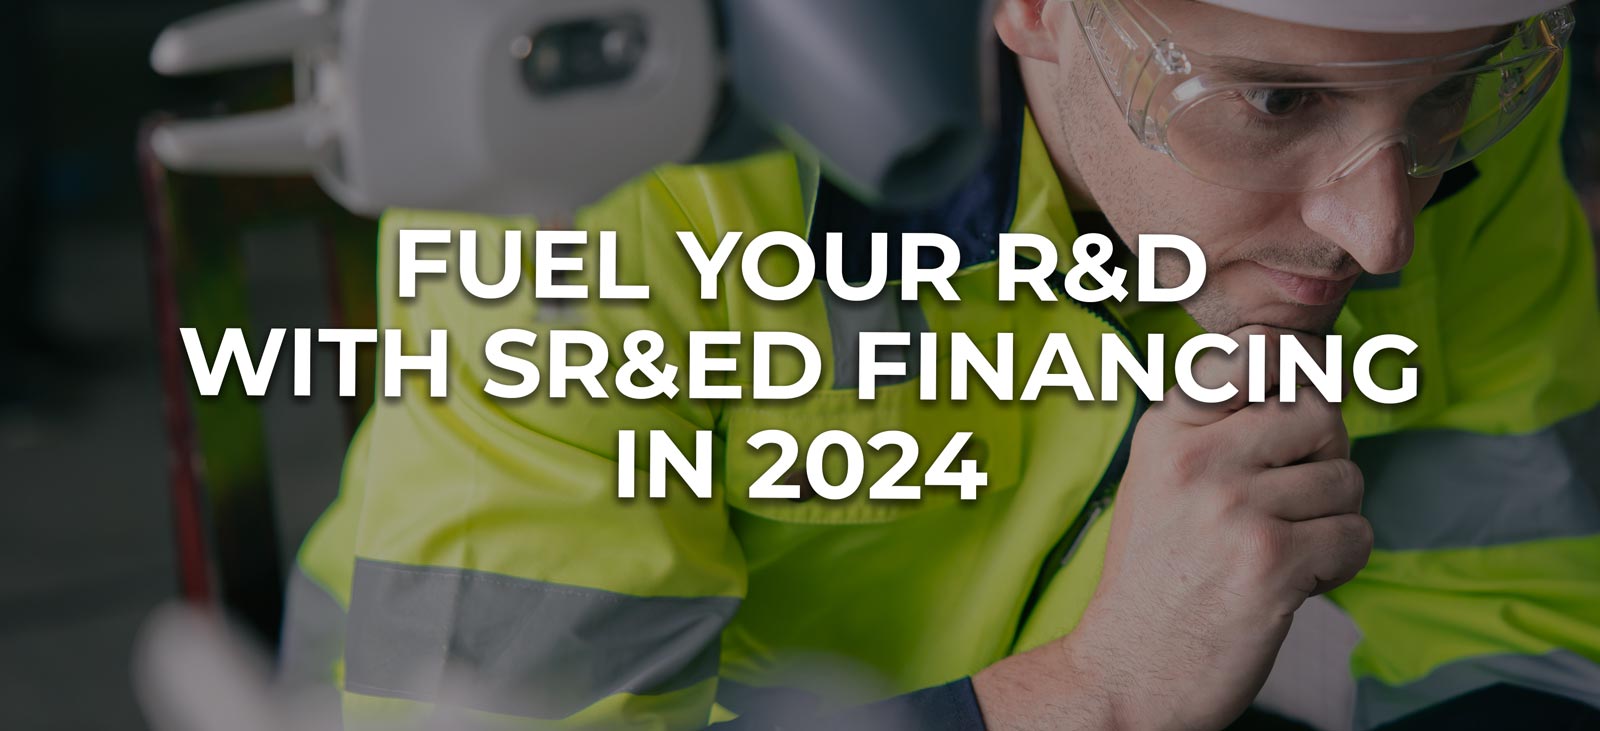 fuel your r&d with sr&ed financing in 2024